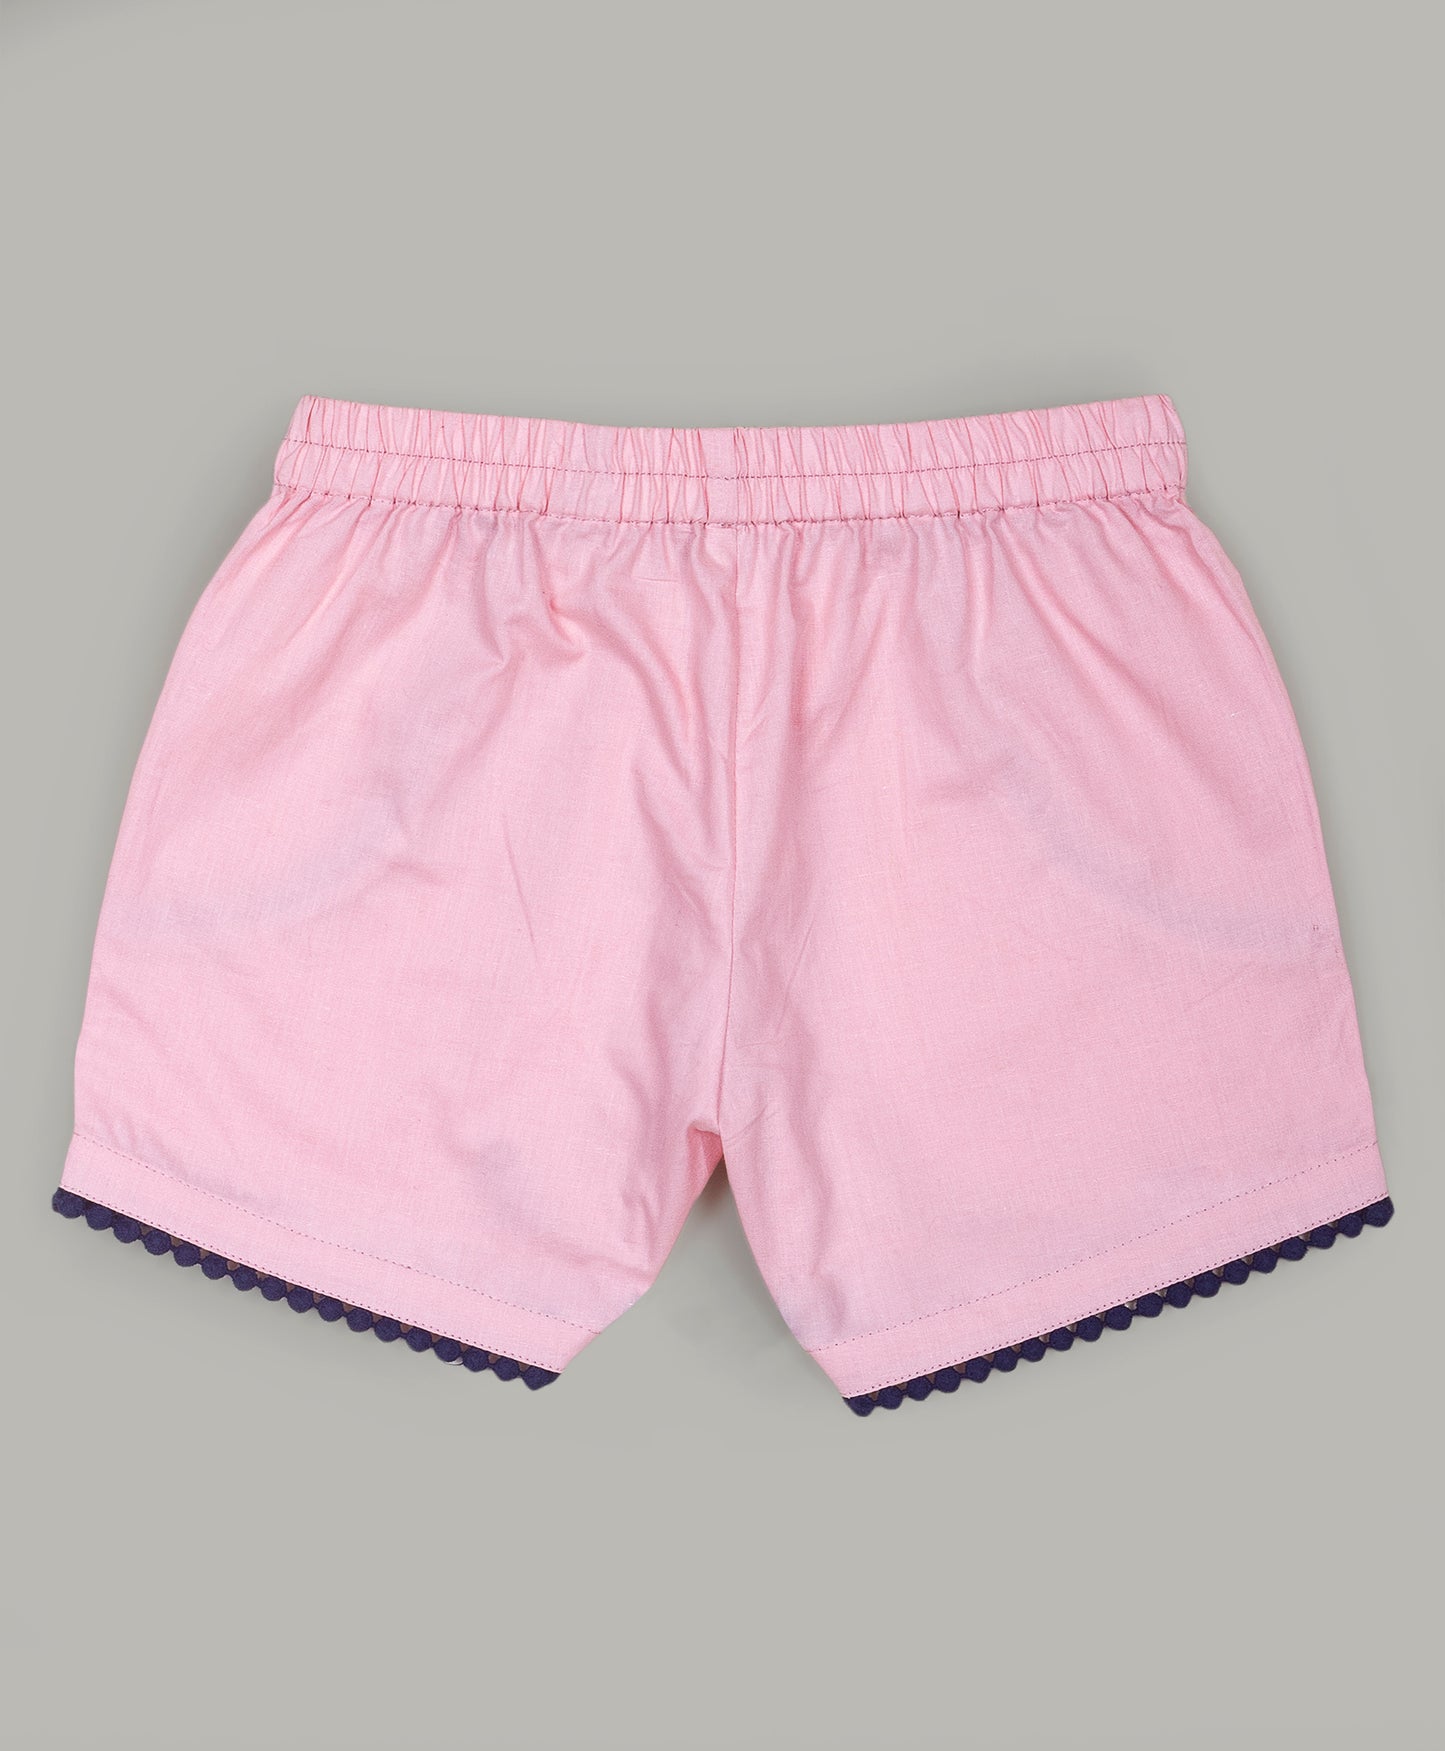 Pink shorts with navy lace detailing